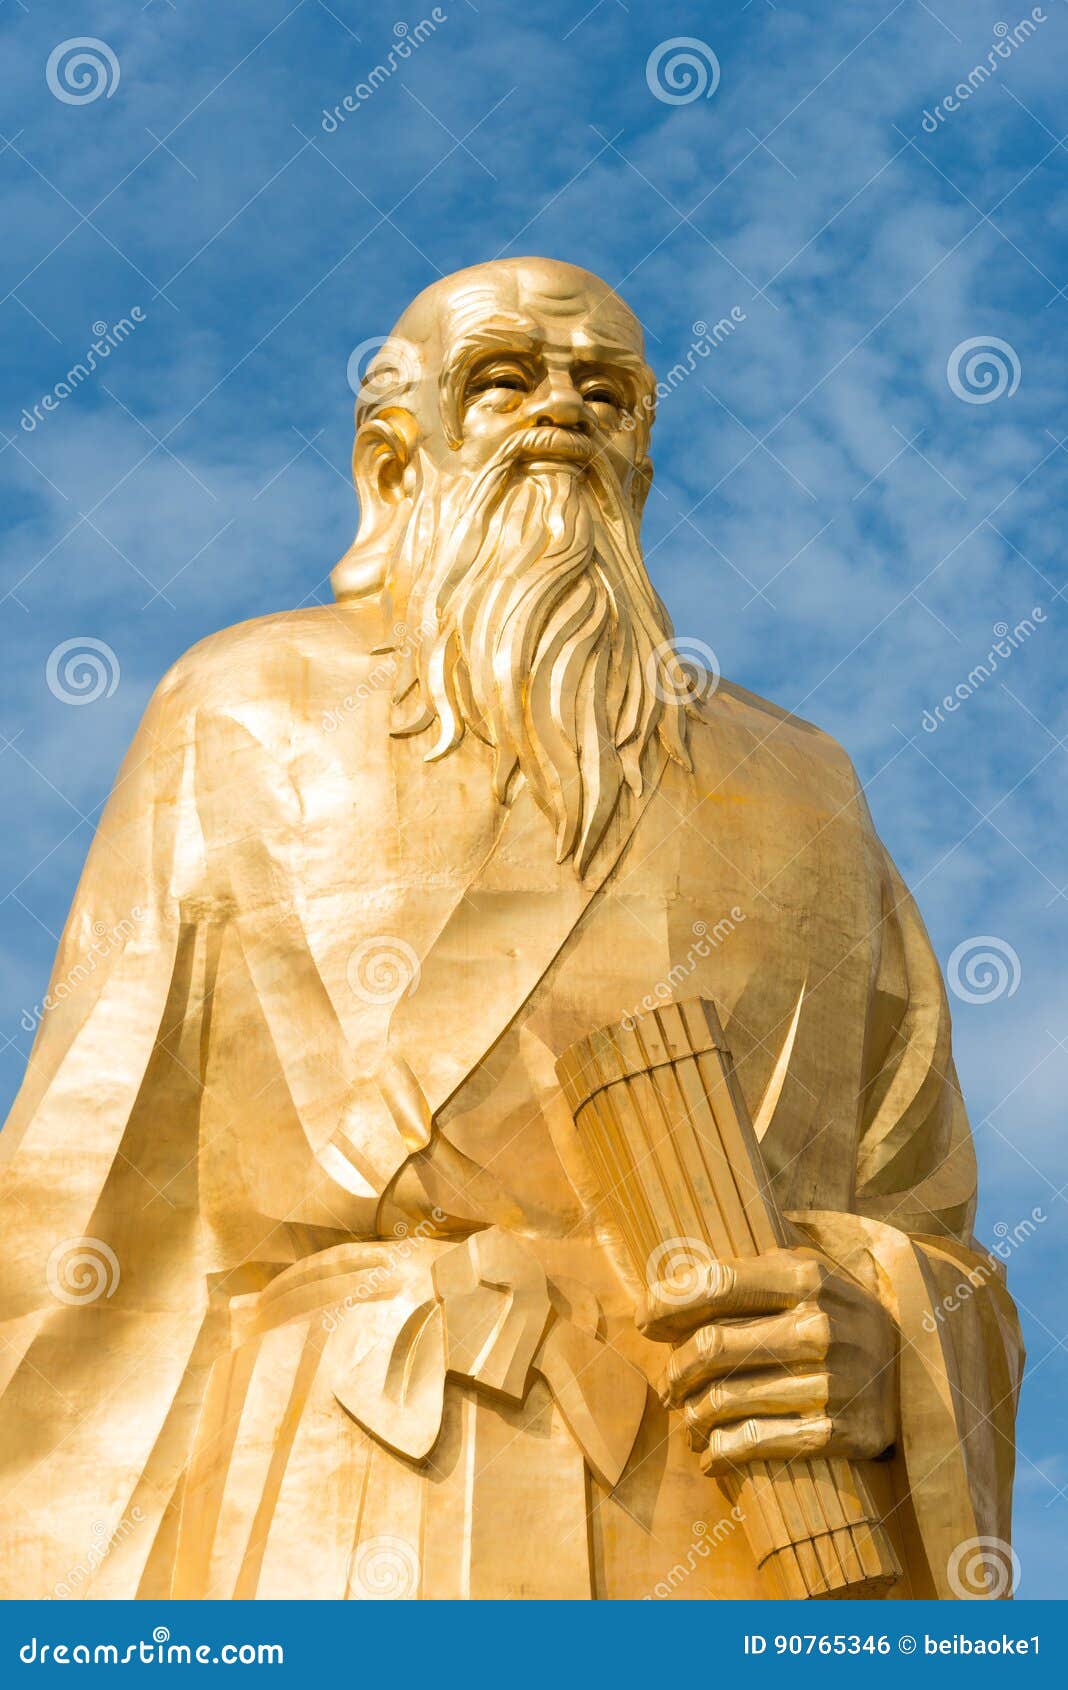 laozi statue at hangu pass scenic area. a famous historic site in lingbao, henan, china.